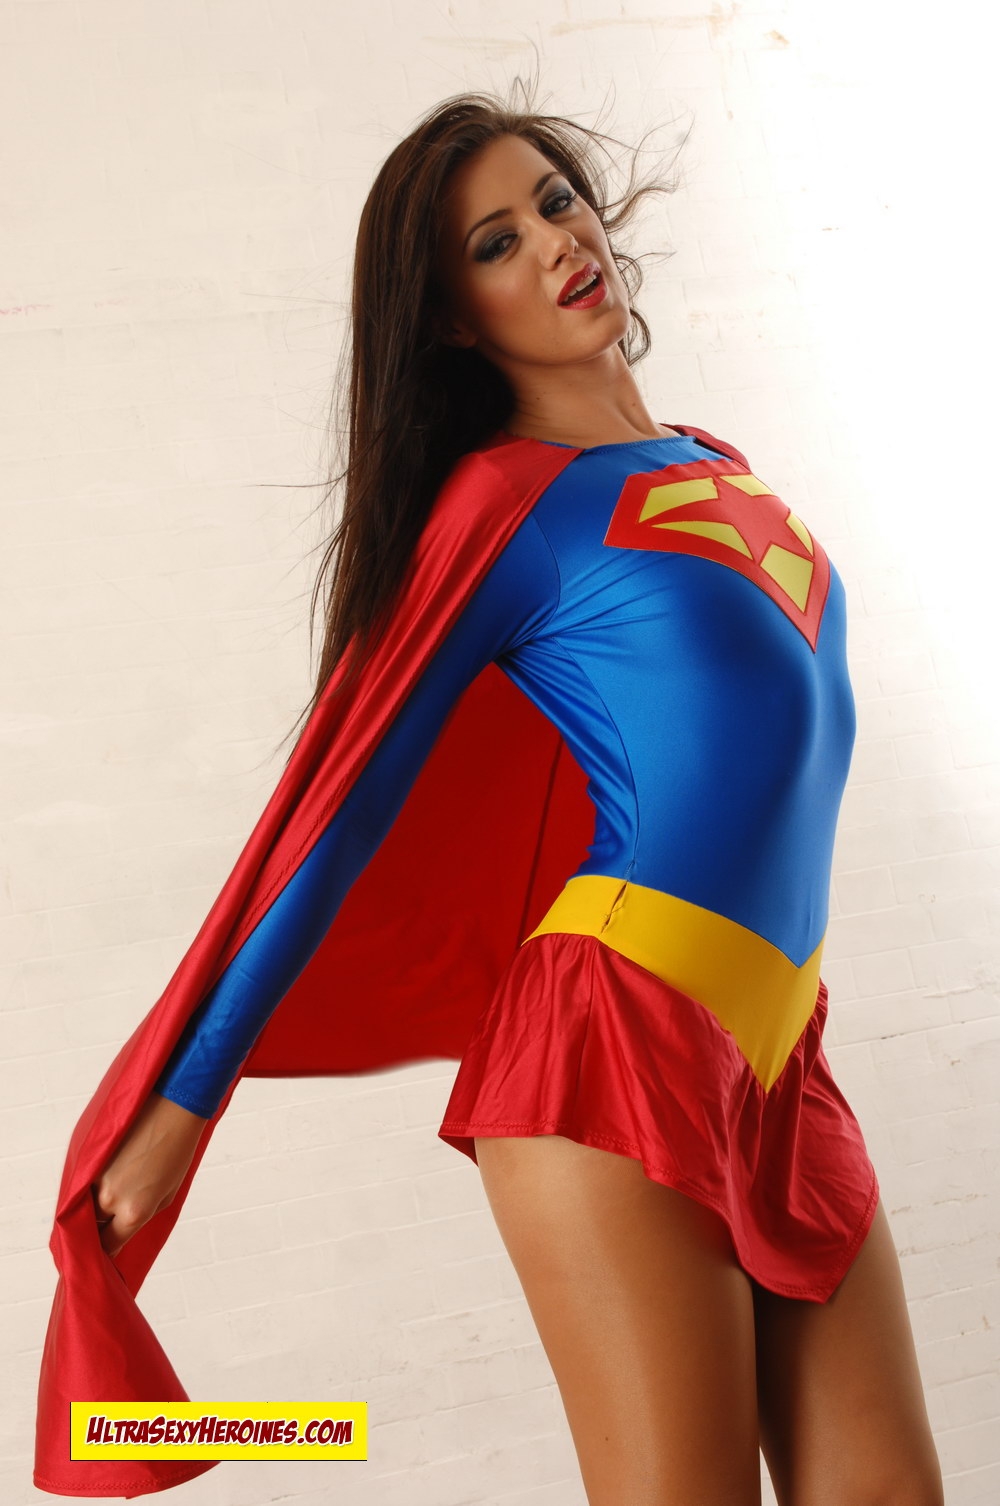 [UltraSexyHeroines] Super Heroine Cosplay Nude - Holly 70